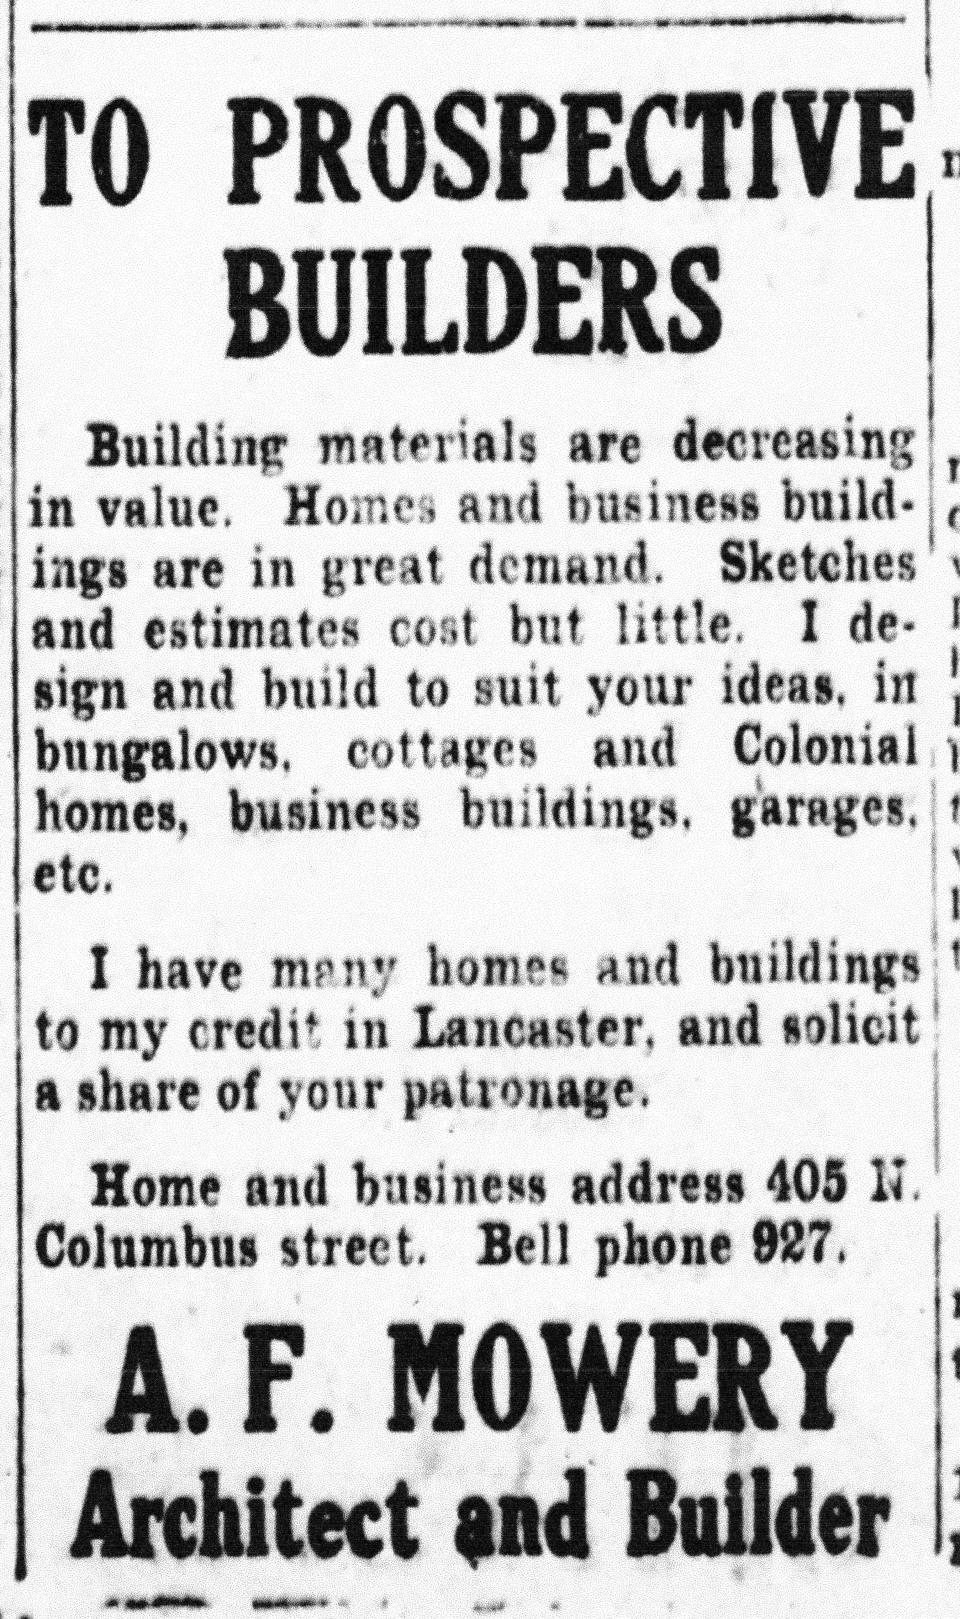 This ad appeared in the Daily Eagle Nov. 30, 1920, when A. F. Mowery was 
living at 405 N. Columbus St.